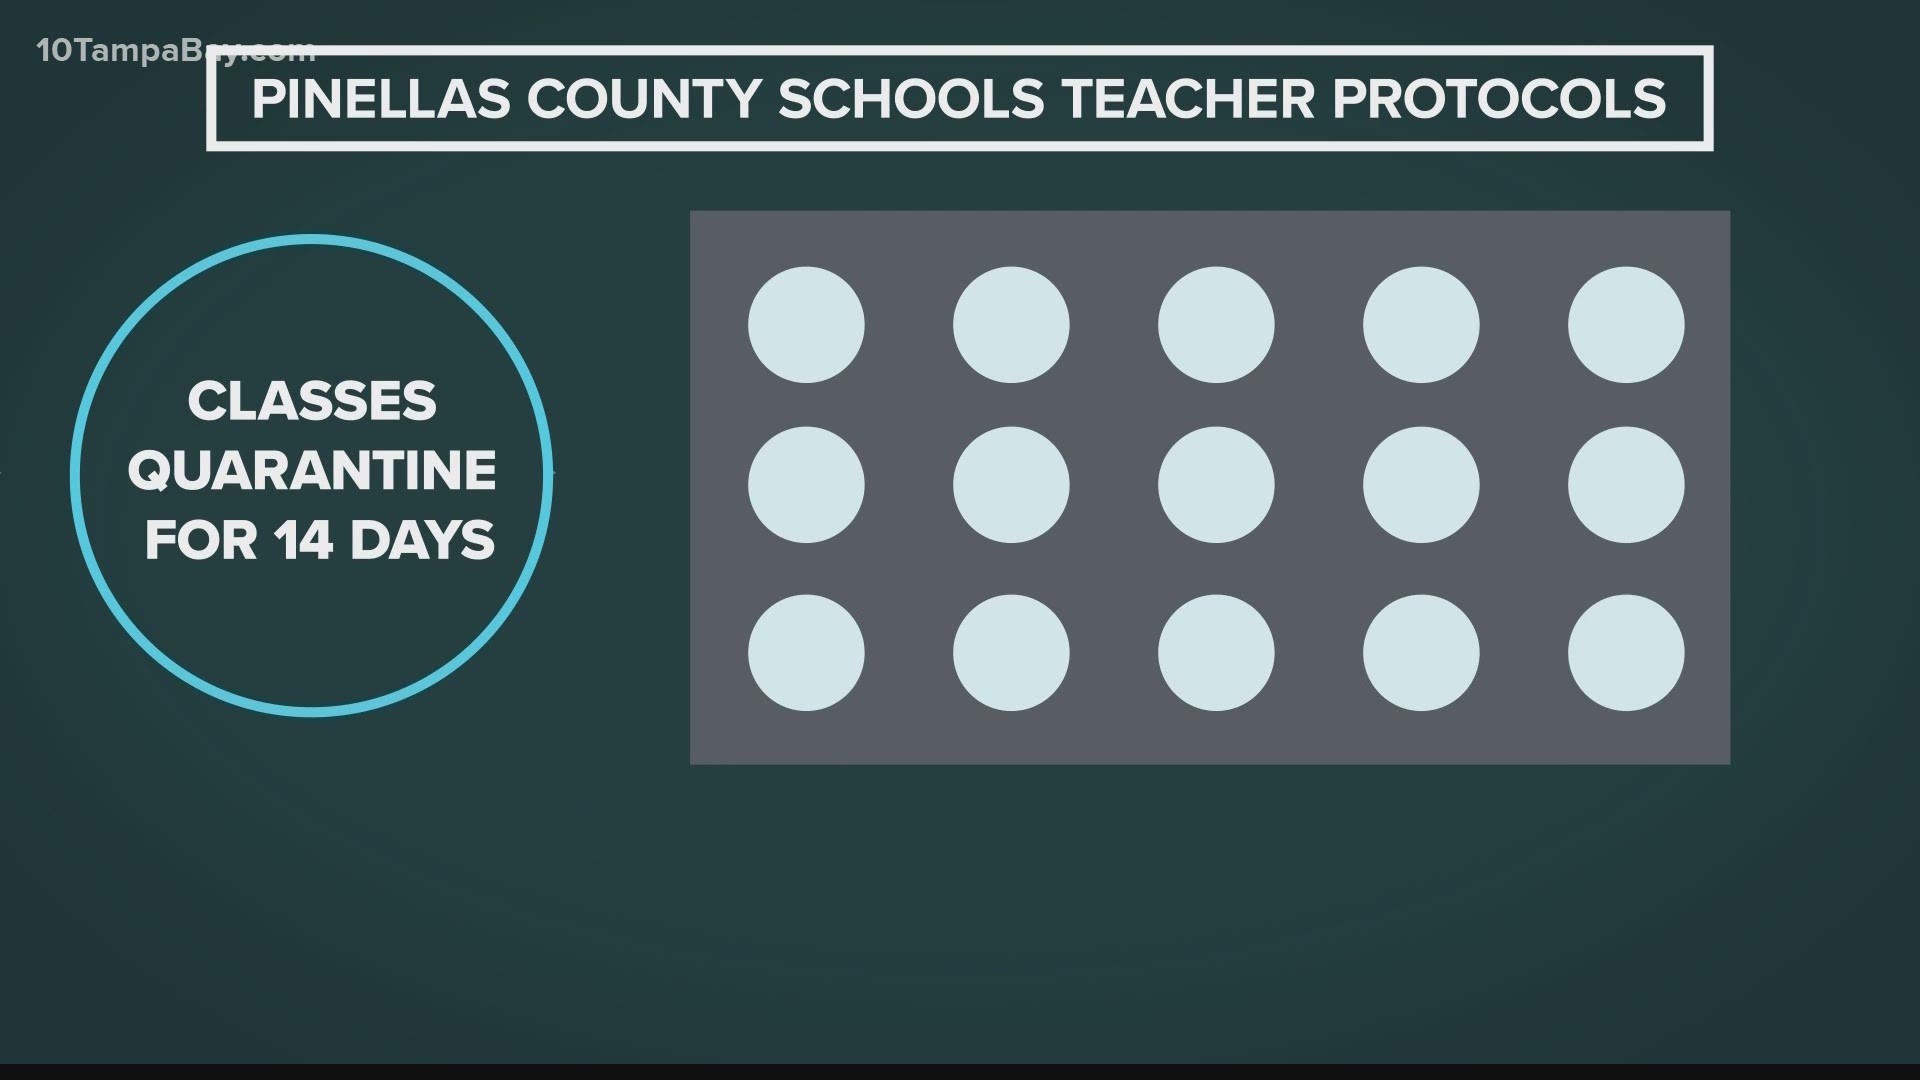 Pinellas County Schools outlined its protocol when a teacher or student tests positive for the coronavirus.